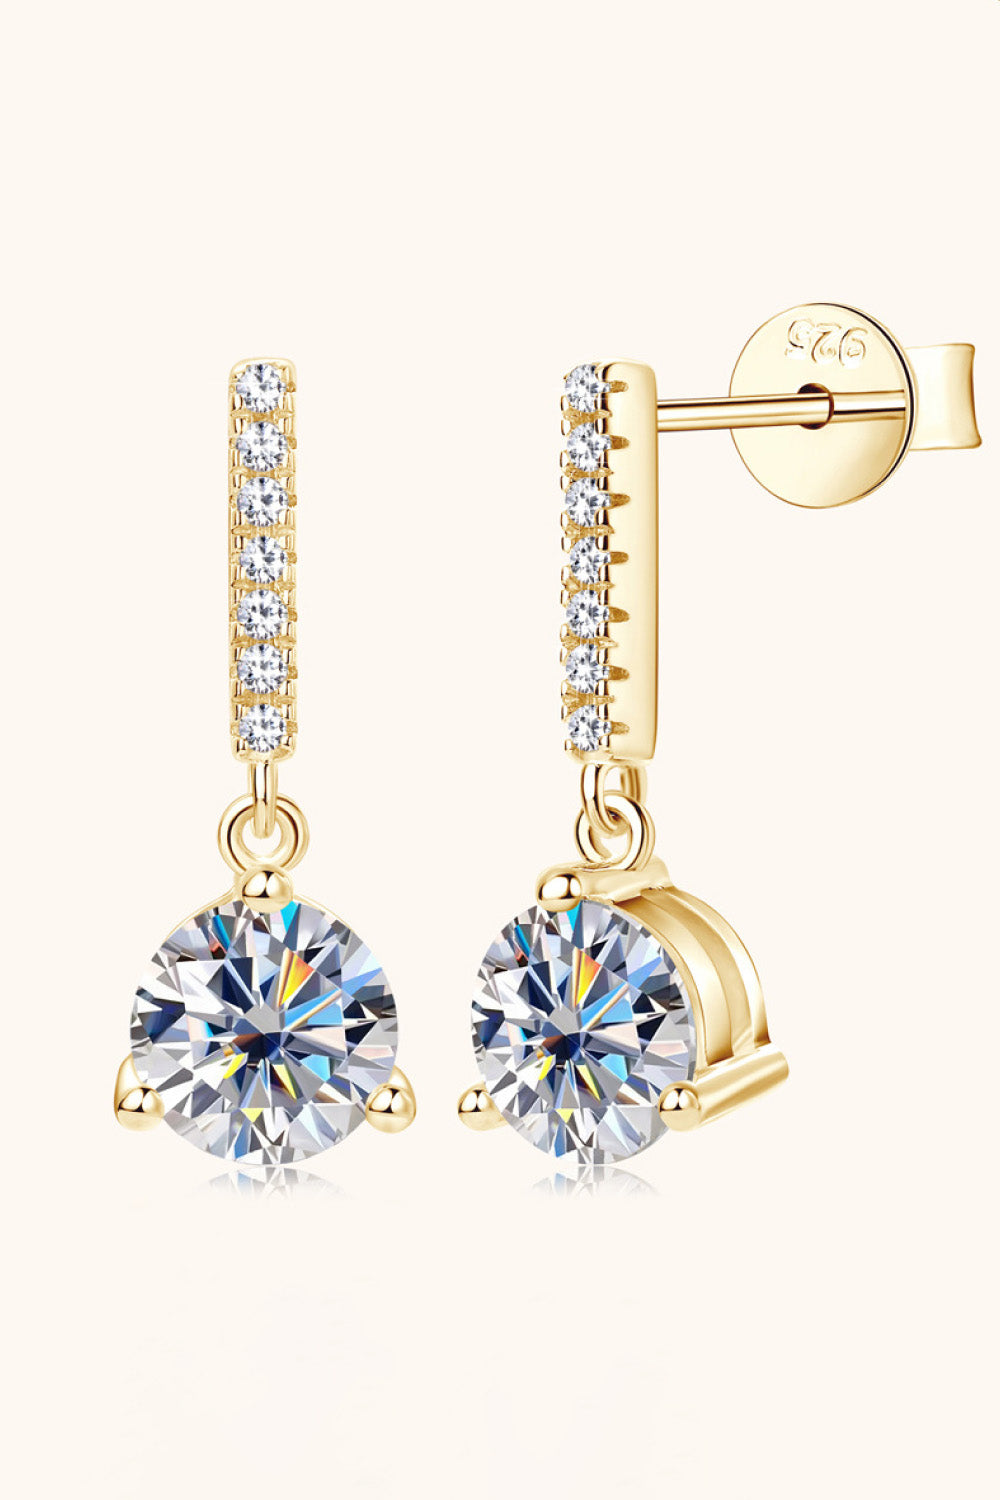 2 Carat Moissanite 925 Sterling Silver Drop Earrings-Earrings-Inspired by Justeen-Women's Clothing Boutique in Chicago, Illinois